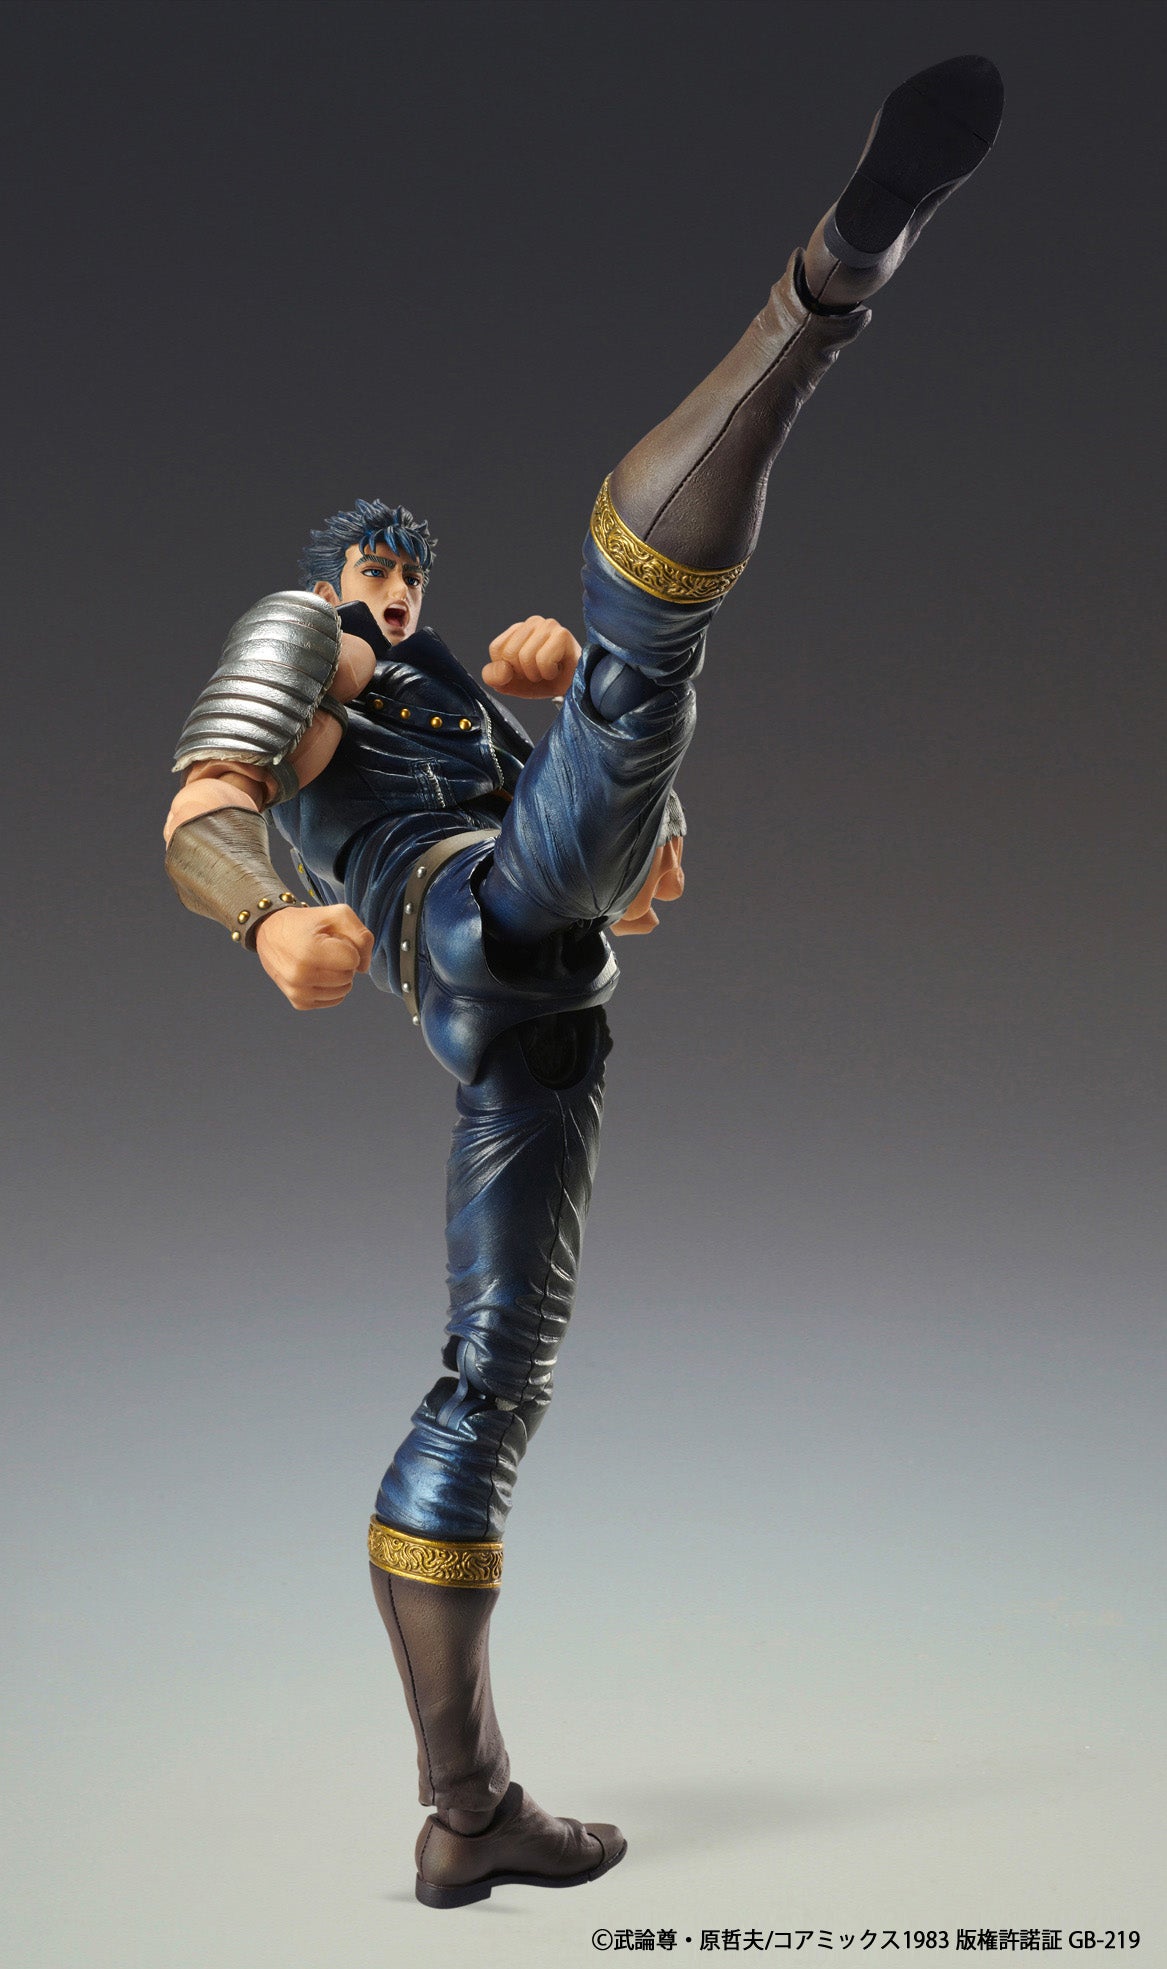 Medicos - Super Action Statue - Fist of the North Star - Kenshiro - Marvelous Toys